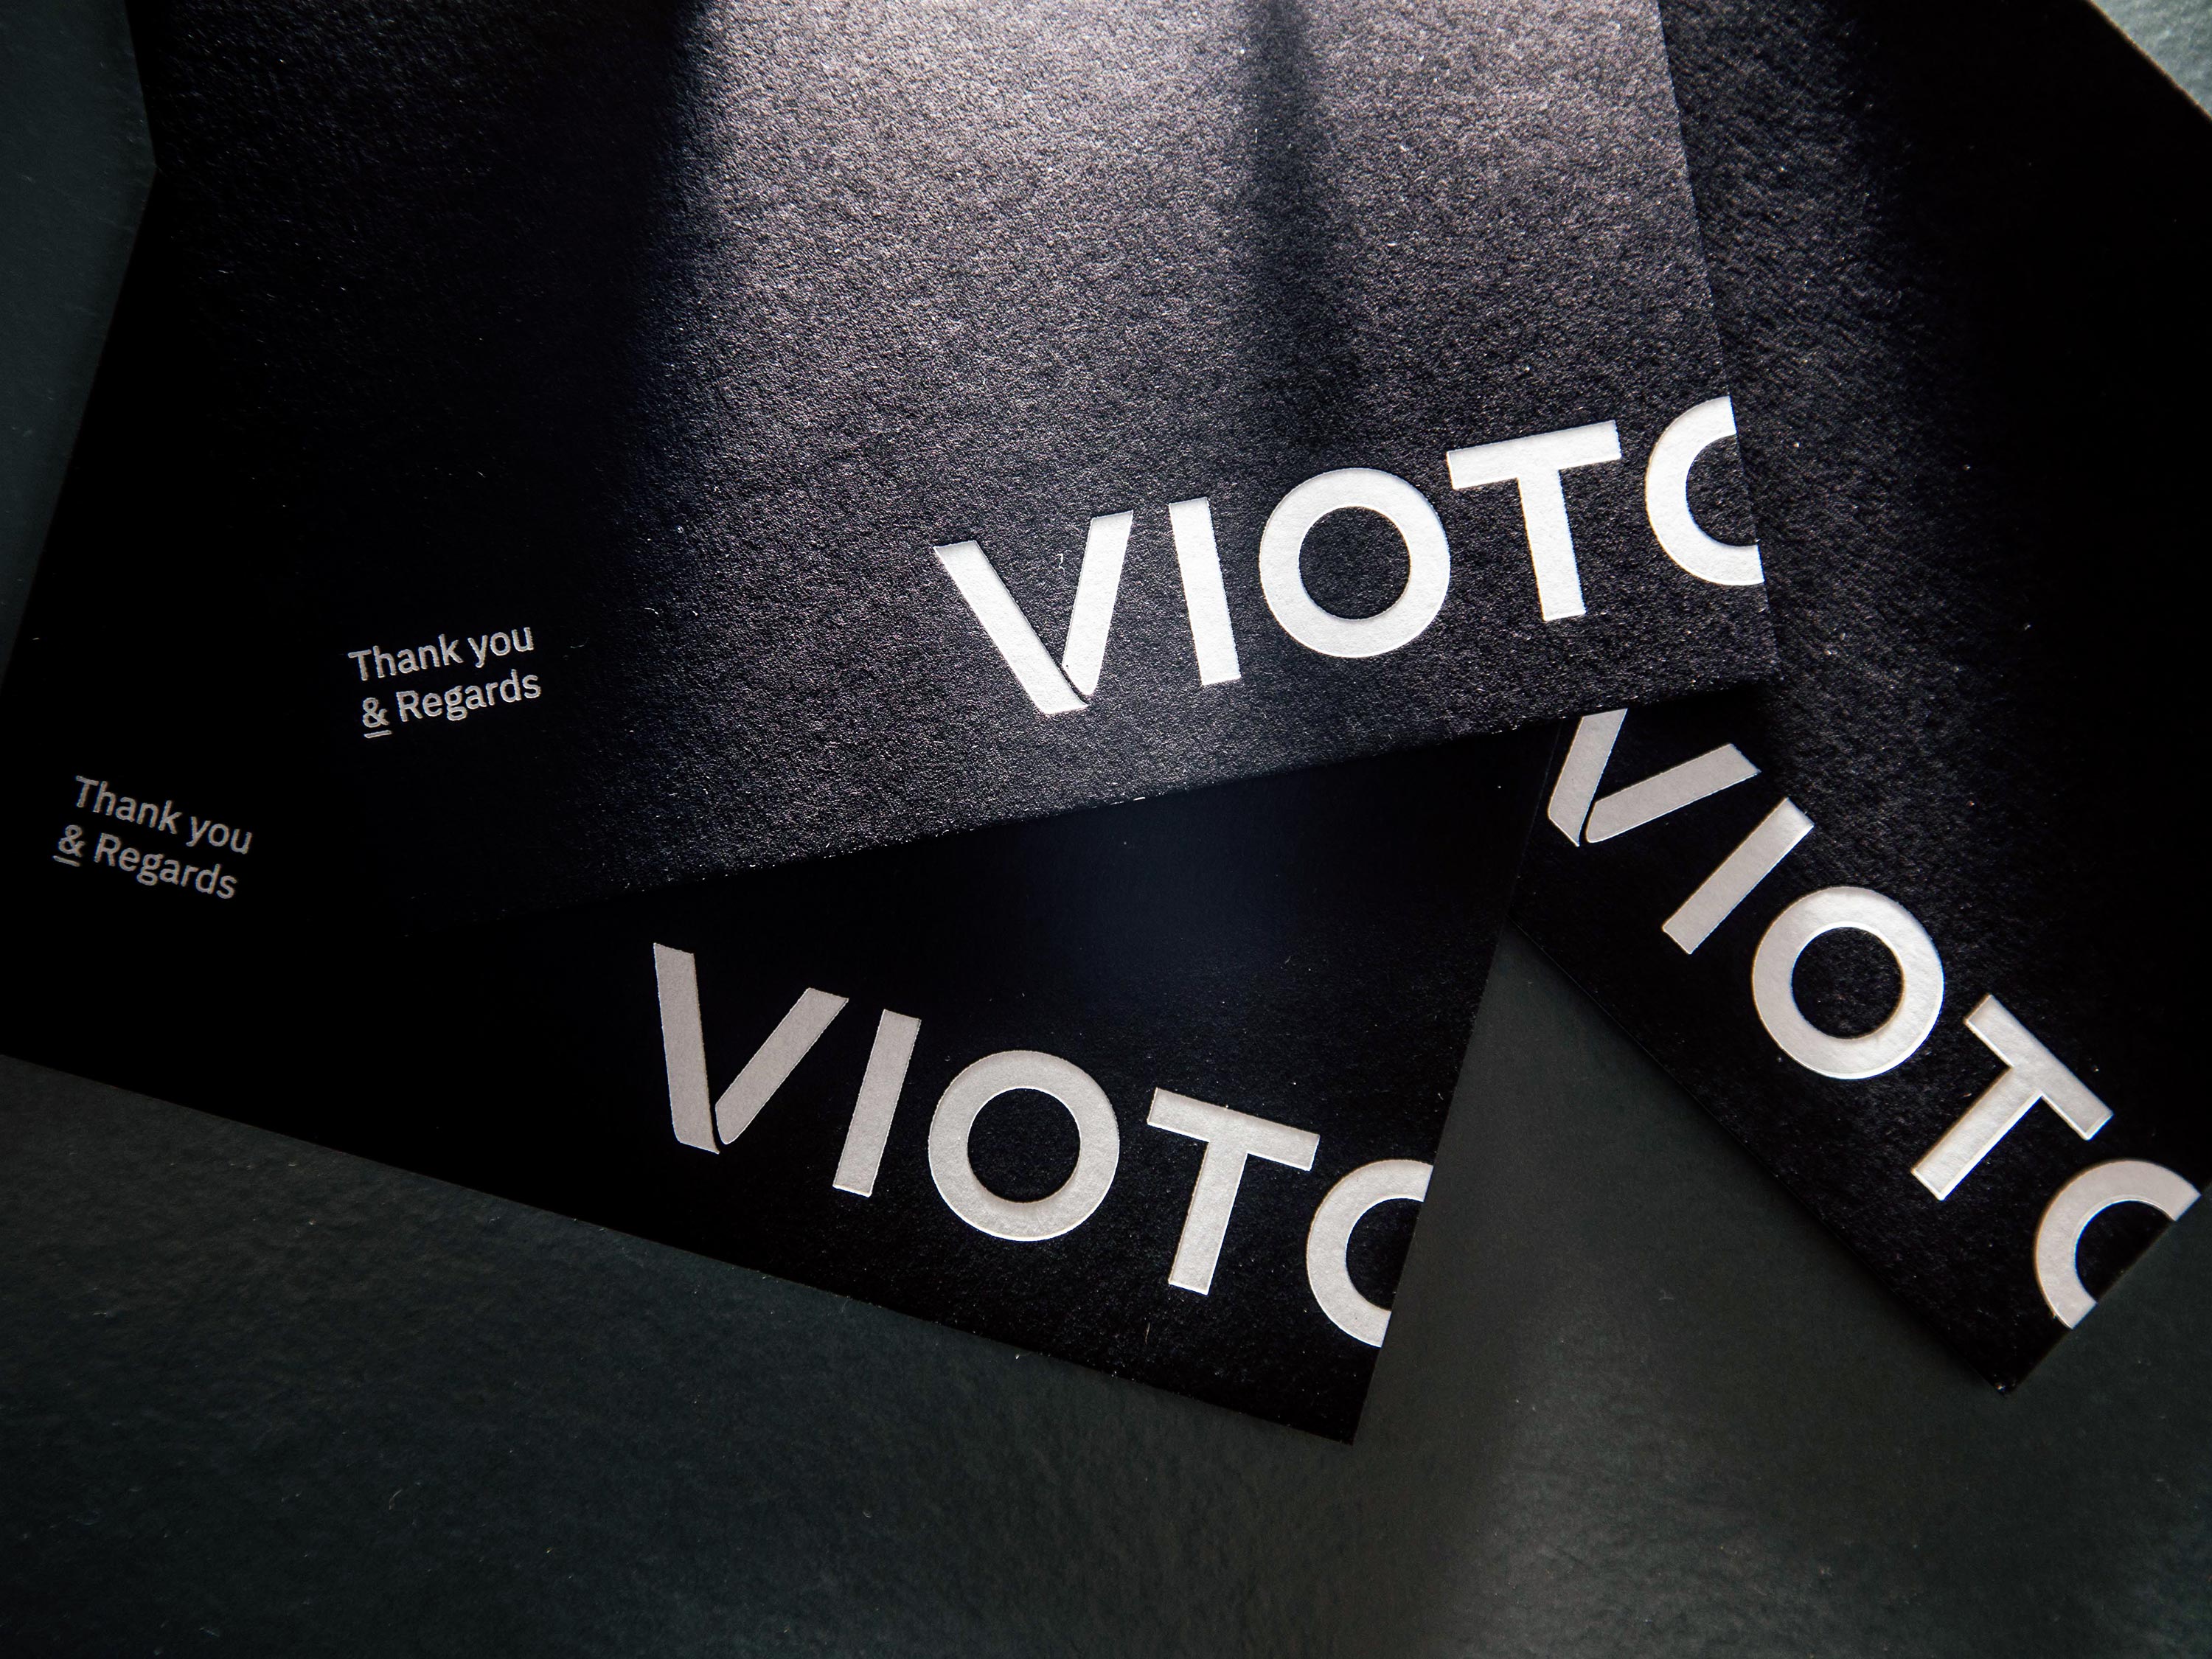 A Tactile Brand Identity Suite